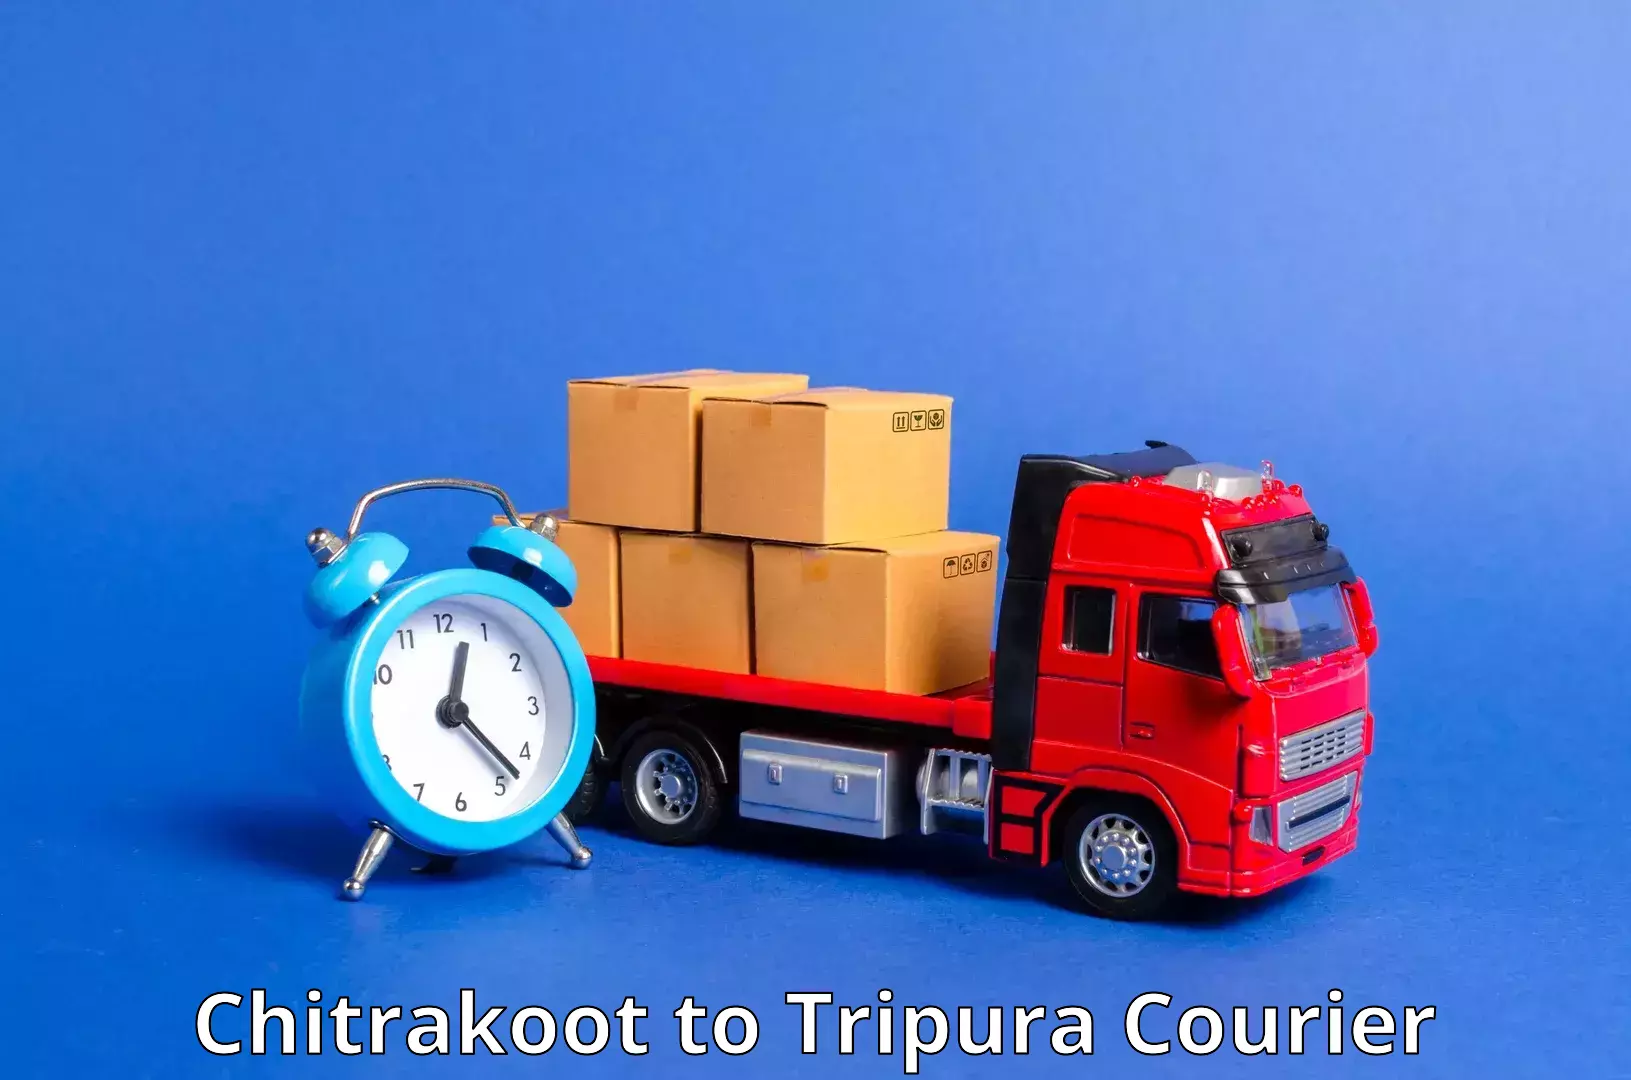 Customizable delivery plans Chitrakoot to Udaipur Tripura